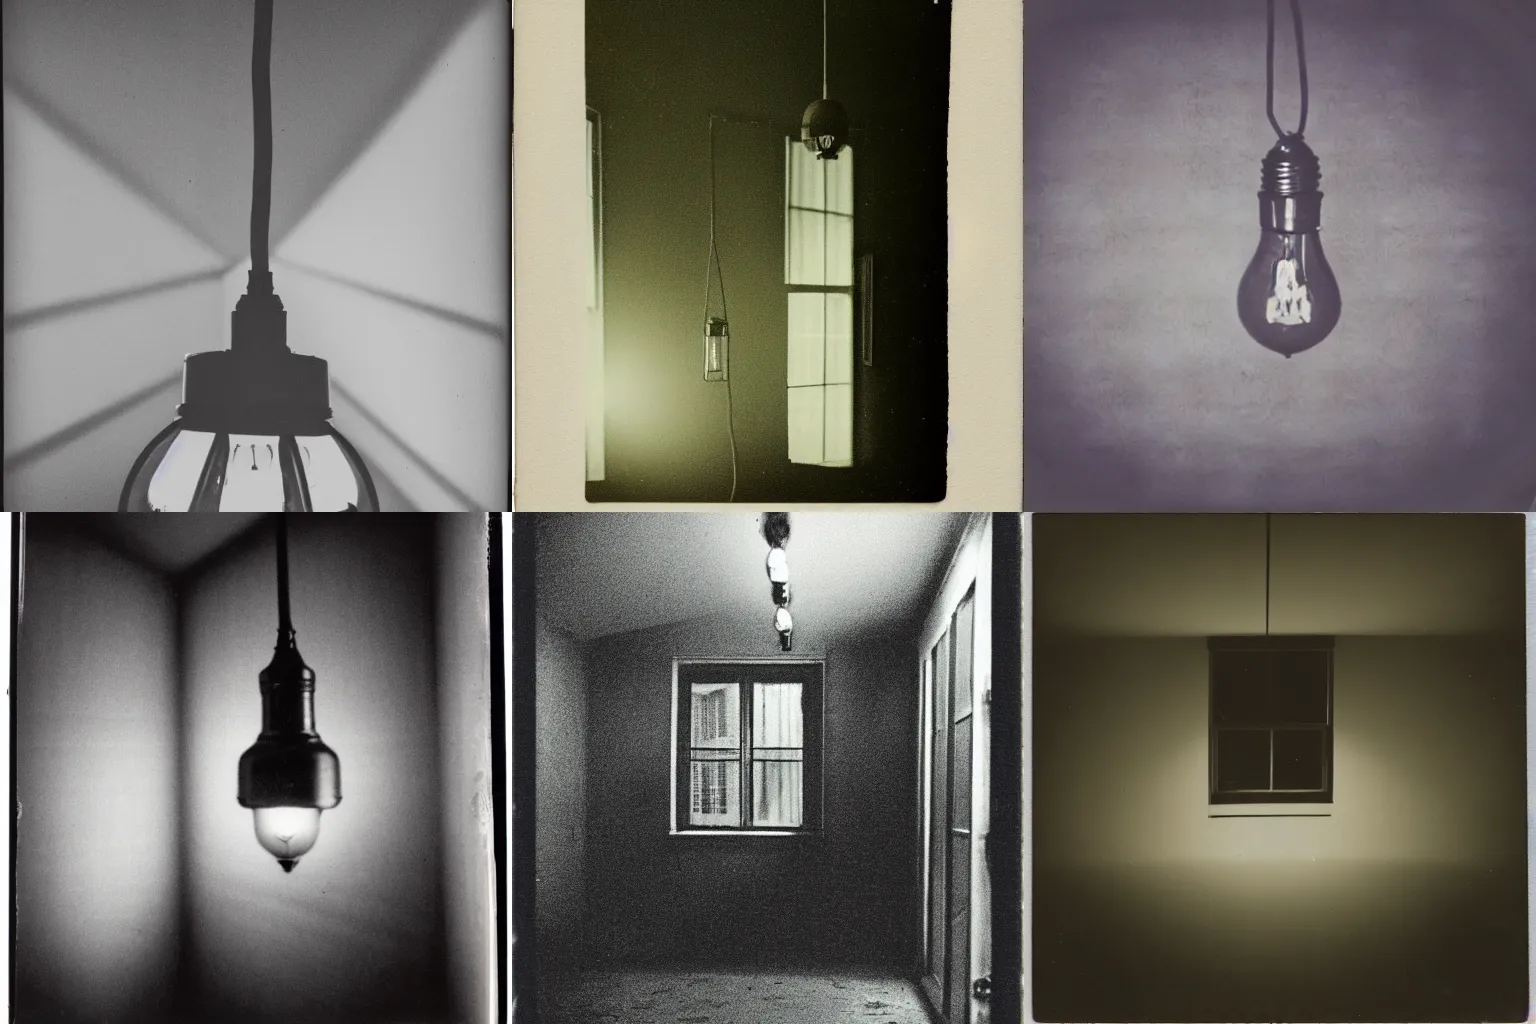 Prompt: a poloroid of an empty dark room with windows a bare lit lightbulb hangs from the celing, spooky, unnerving